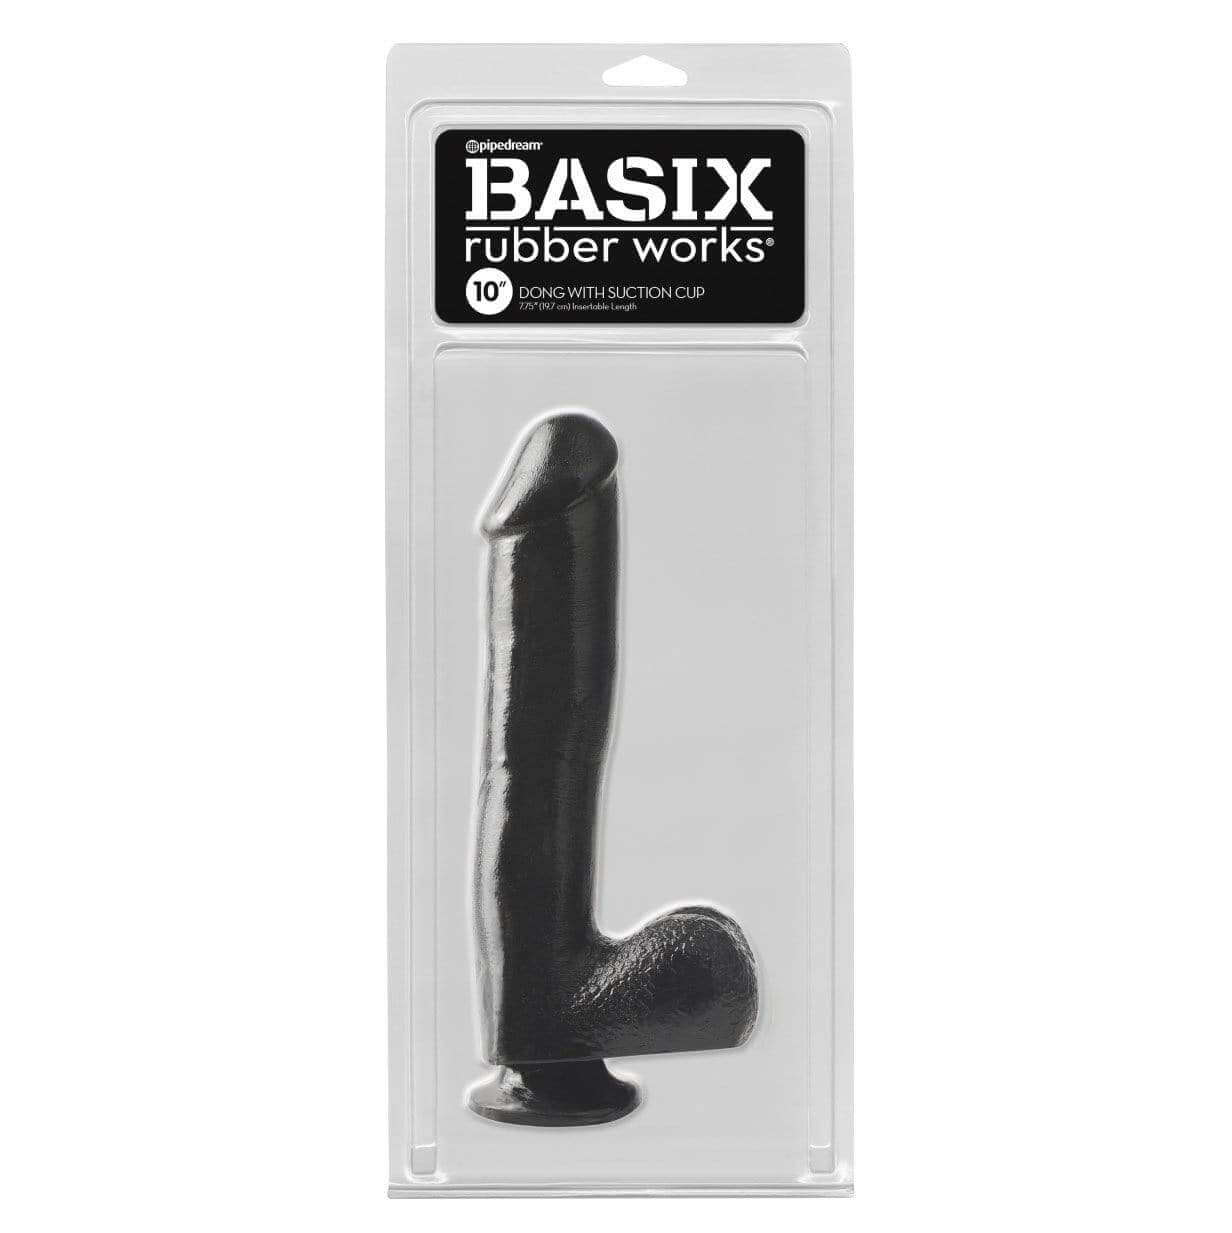 Basix Rubber Works 10 Dong with Suction Cup - Black - Thorn & Feather Sex Toy Canada